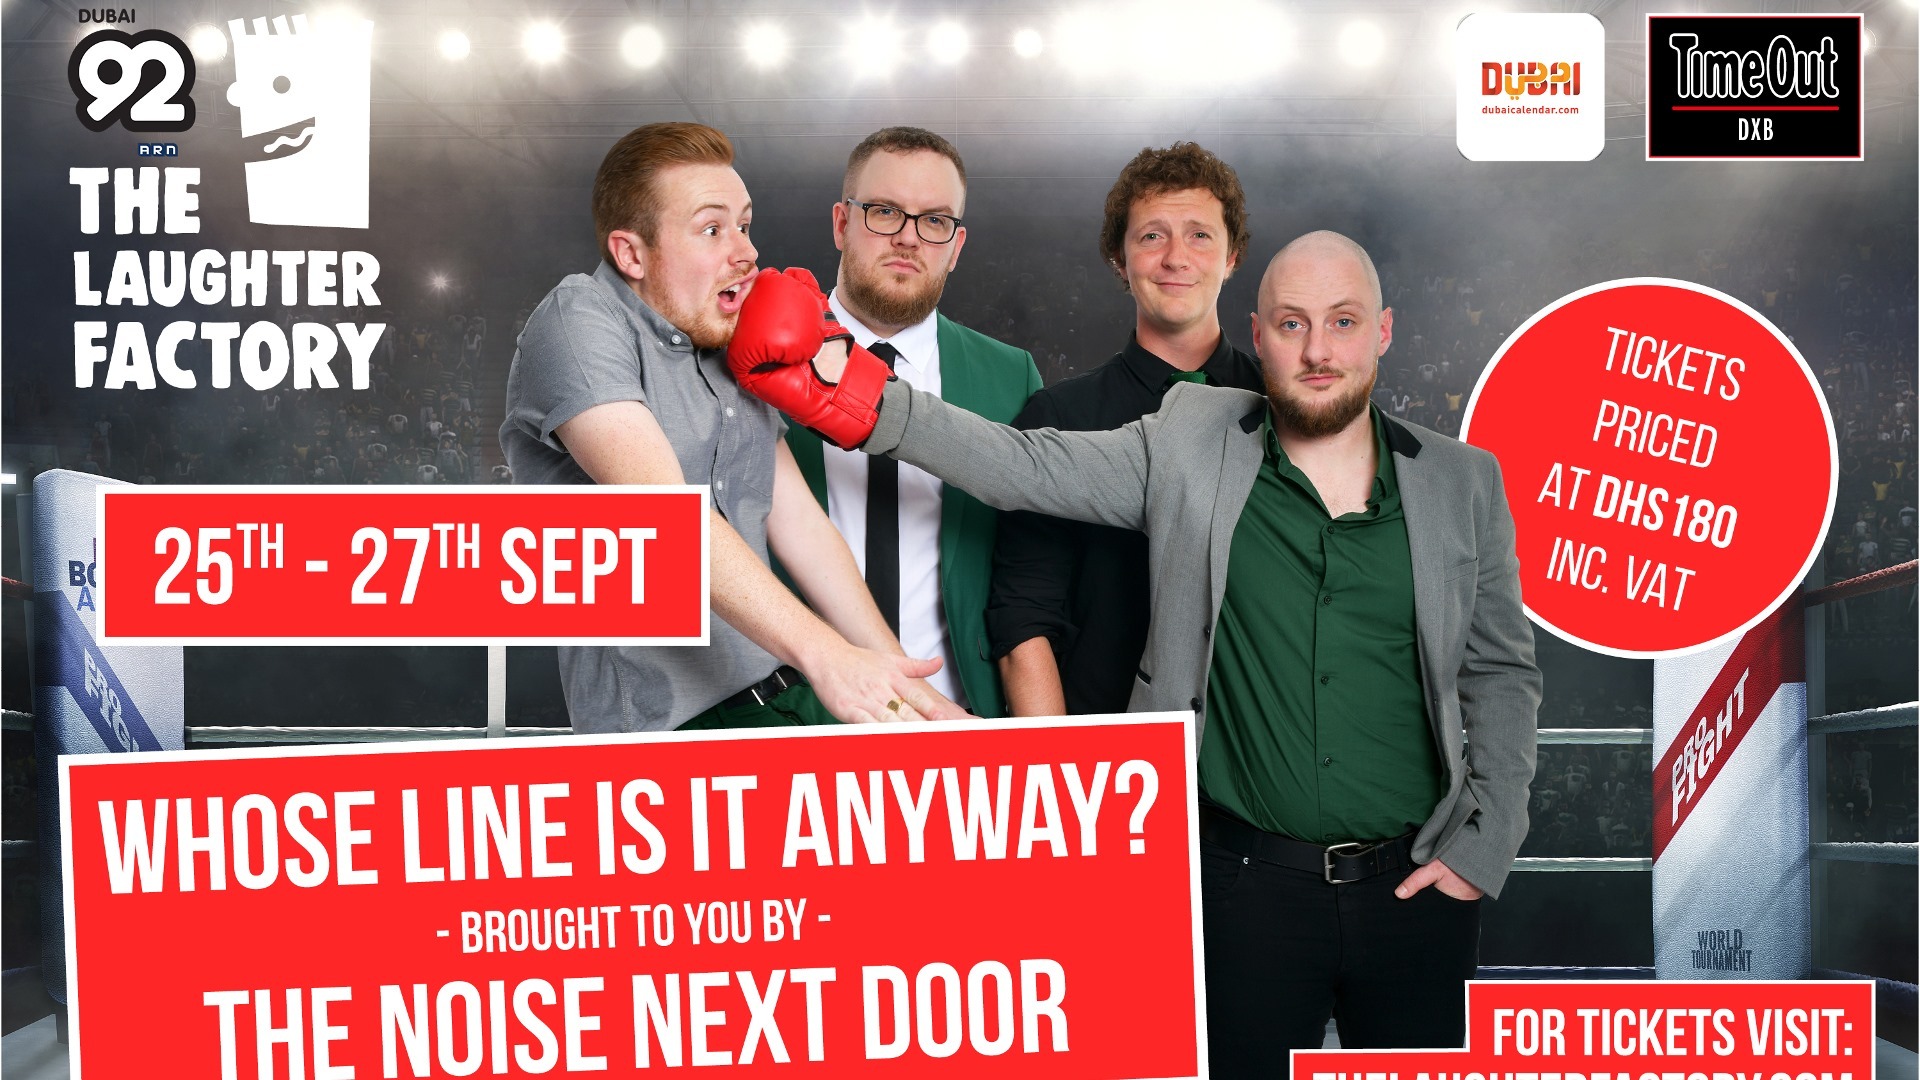 Whose Line Is It Anyway? at the Movenpick JBR - Coming Soon in UAE